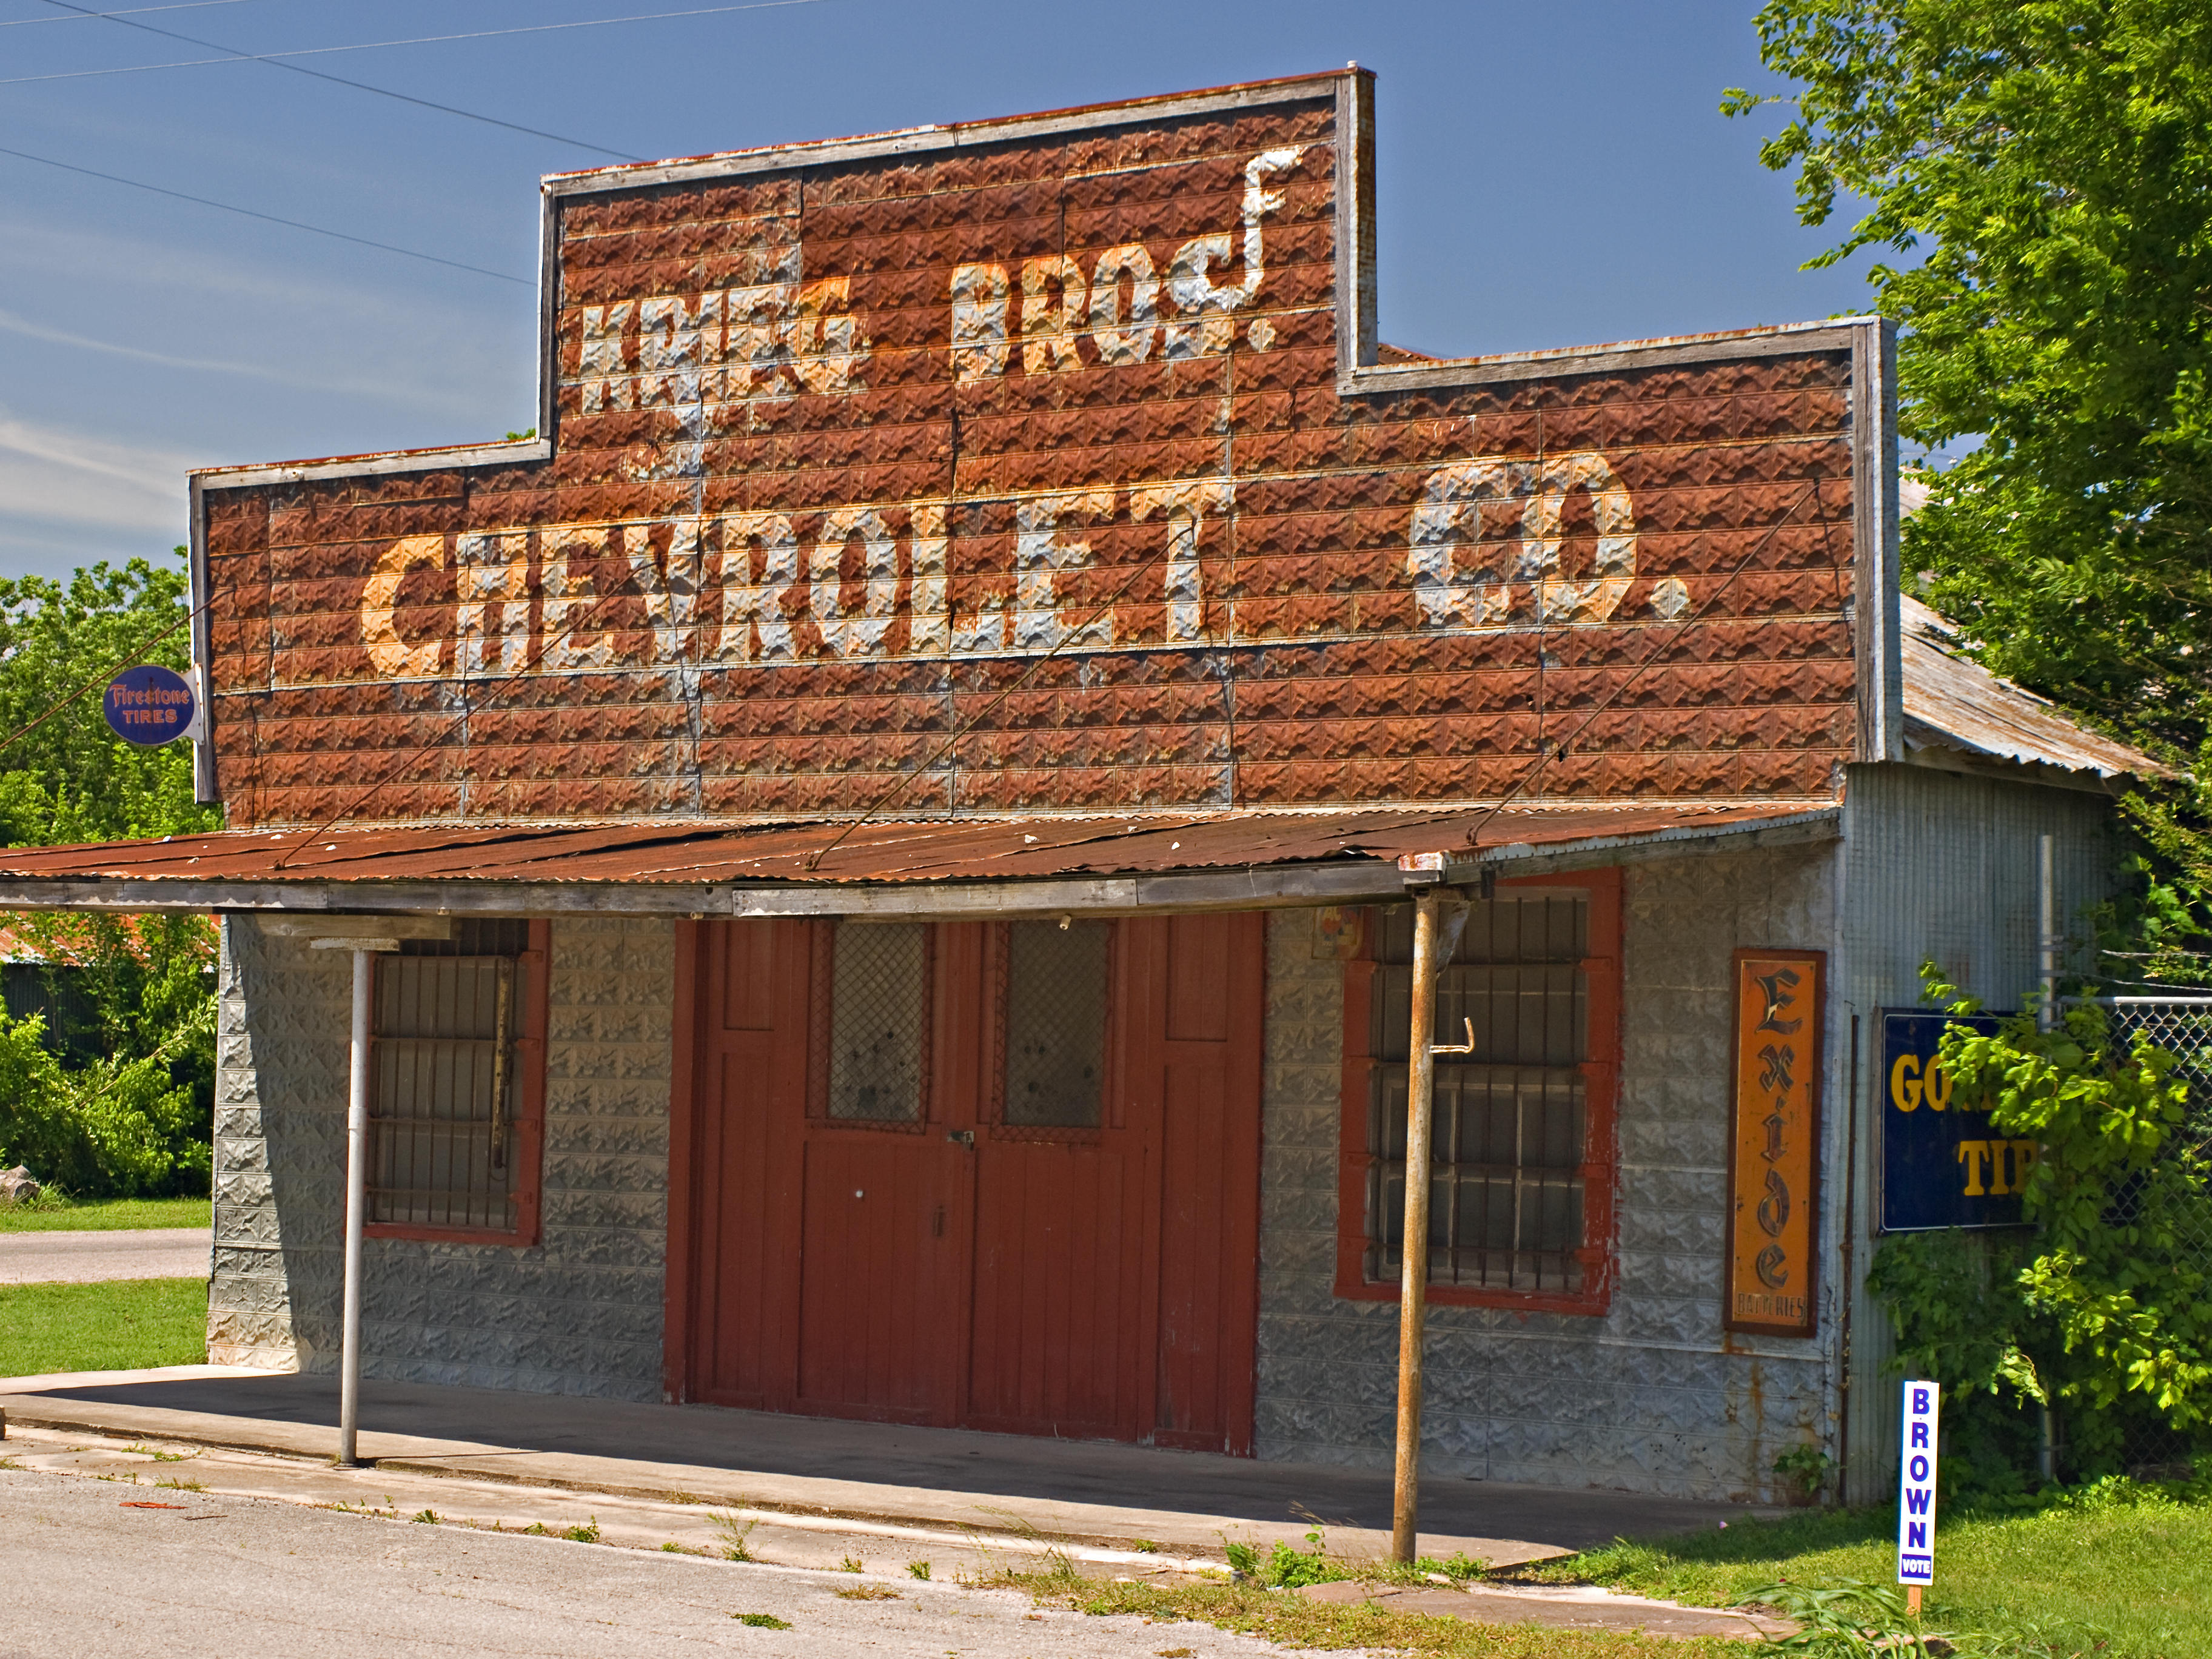 A Good place to buy a Chevrolet?